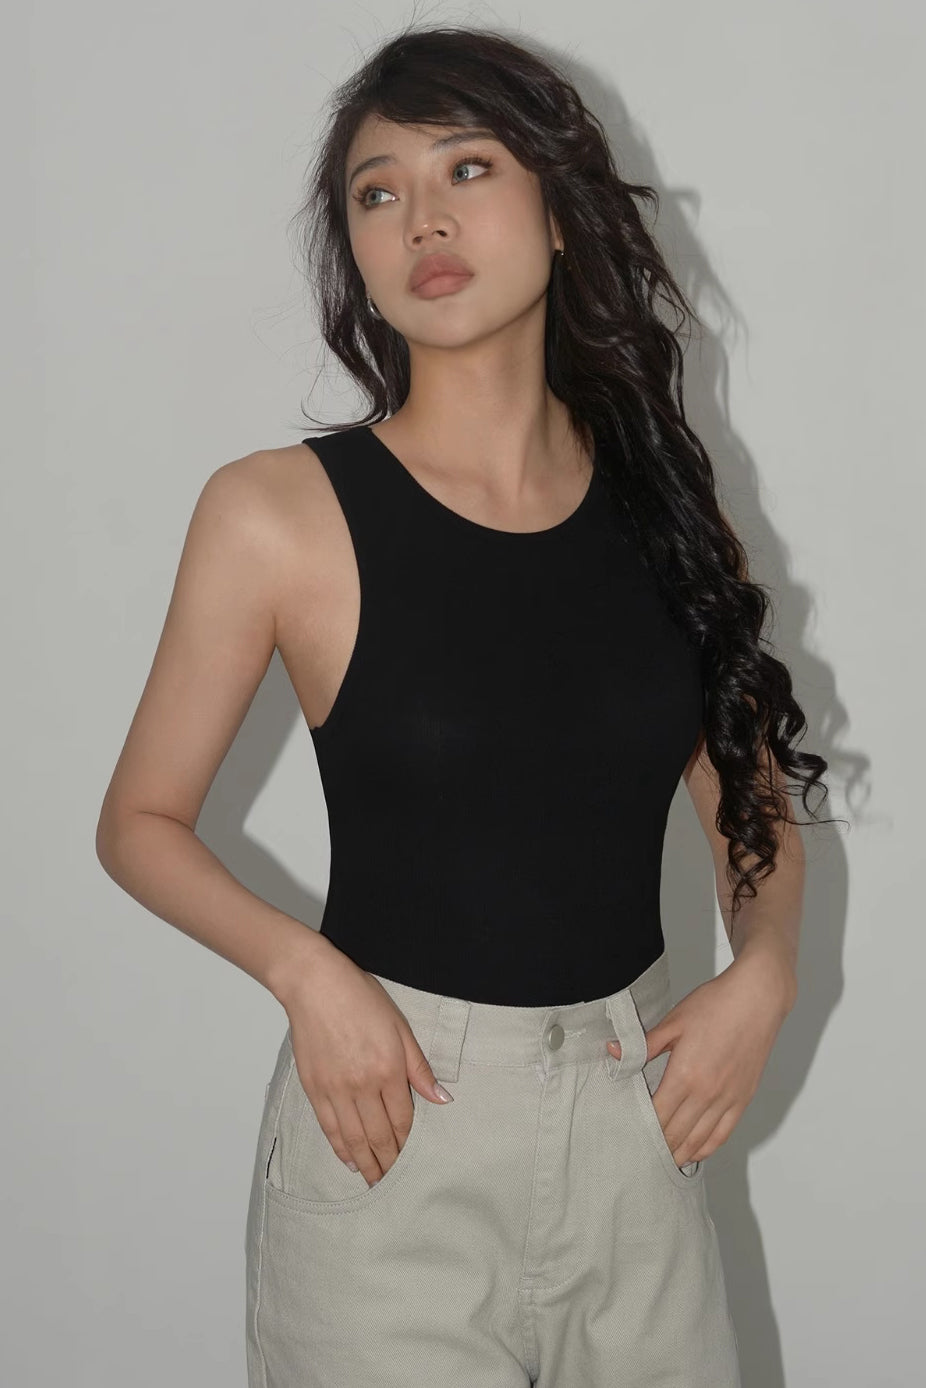 Solid Backless High Elasticity Jumpsuit